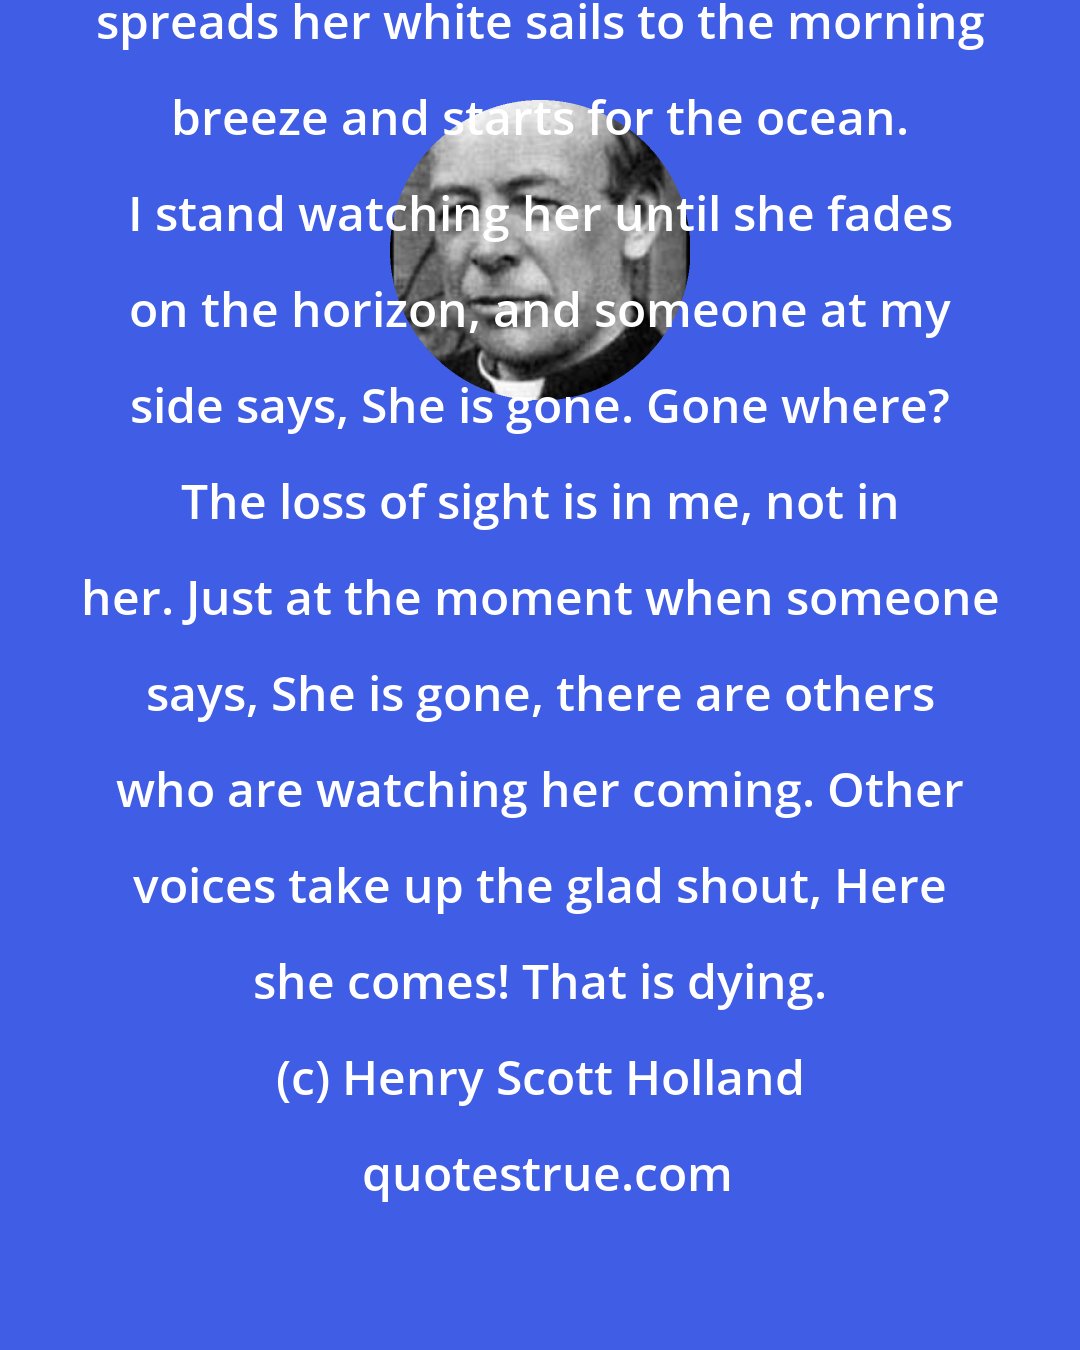 Henry Scott Holland: I am standing on the seashore. A ship spreads her white sails to the morning breeze and starts for the ocean. I stand watching her until she fades on the horizon, and someone at my side says, She is gone. Gone where? The loss of sight is in me, not in her. Just at the moment when someone says, She is gone, there are others who are watching her coming. Other voices take up the glad shout, Here she comes! That is dying.